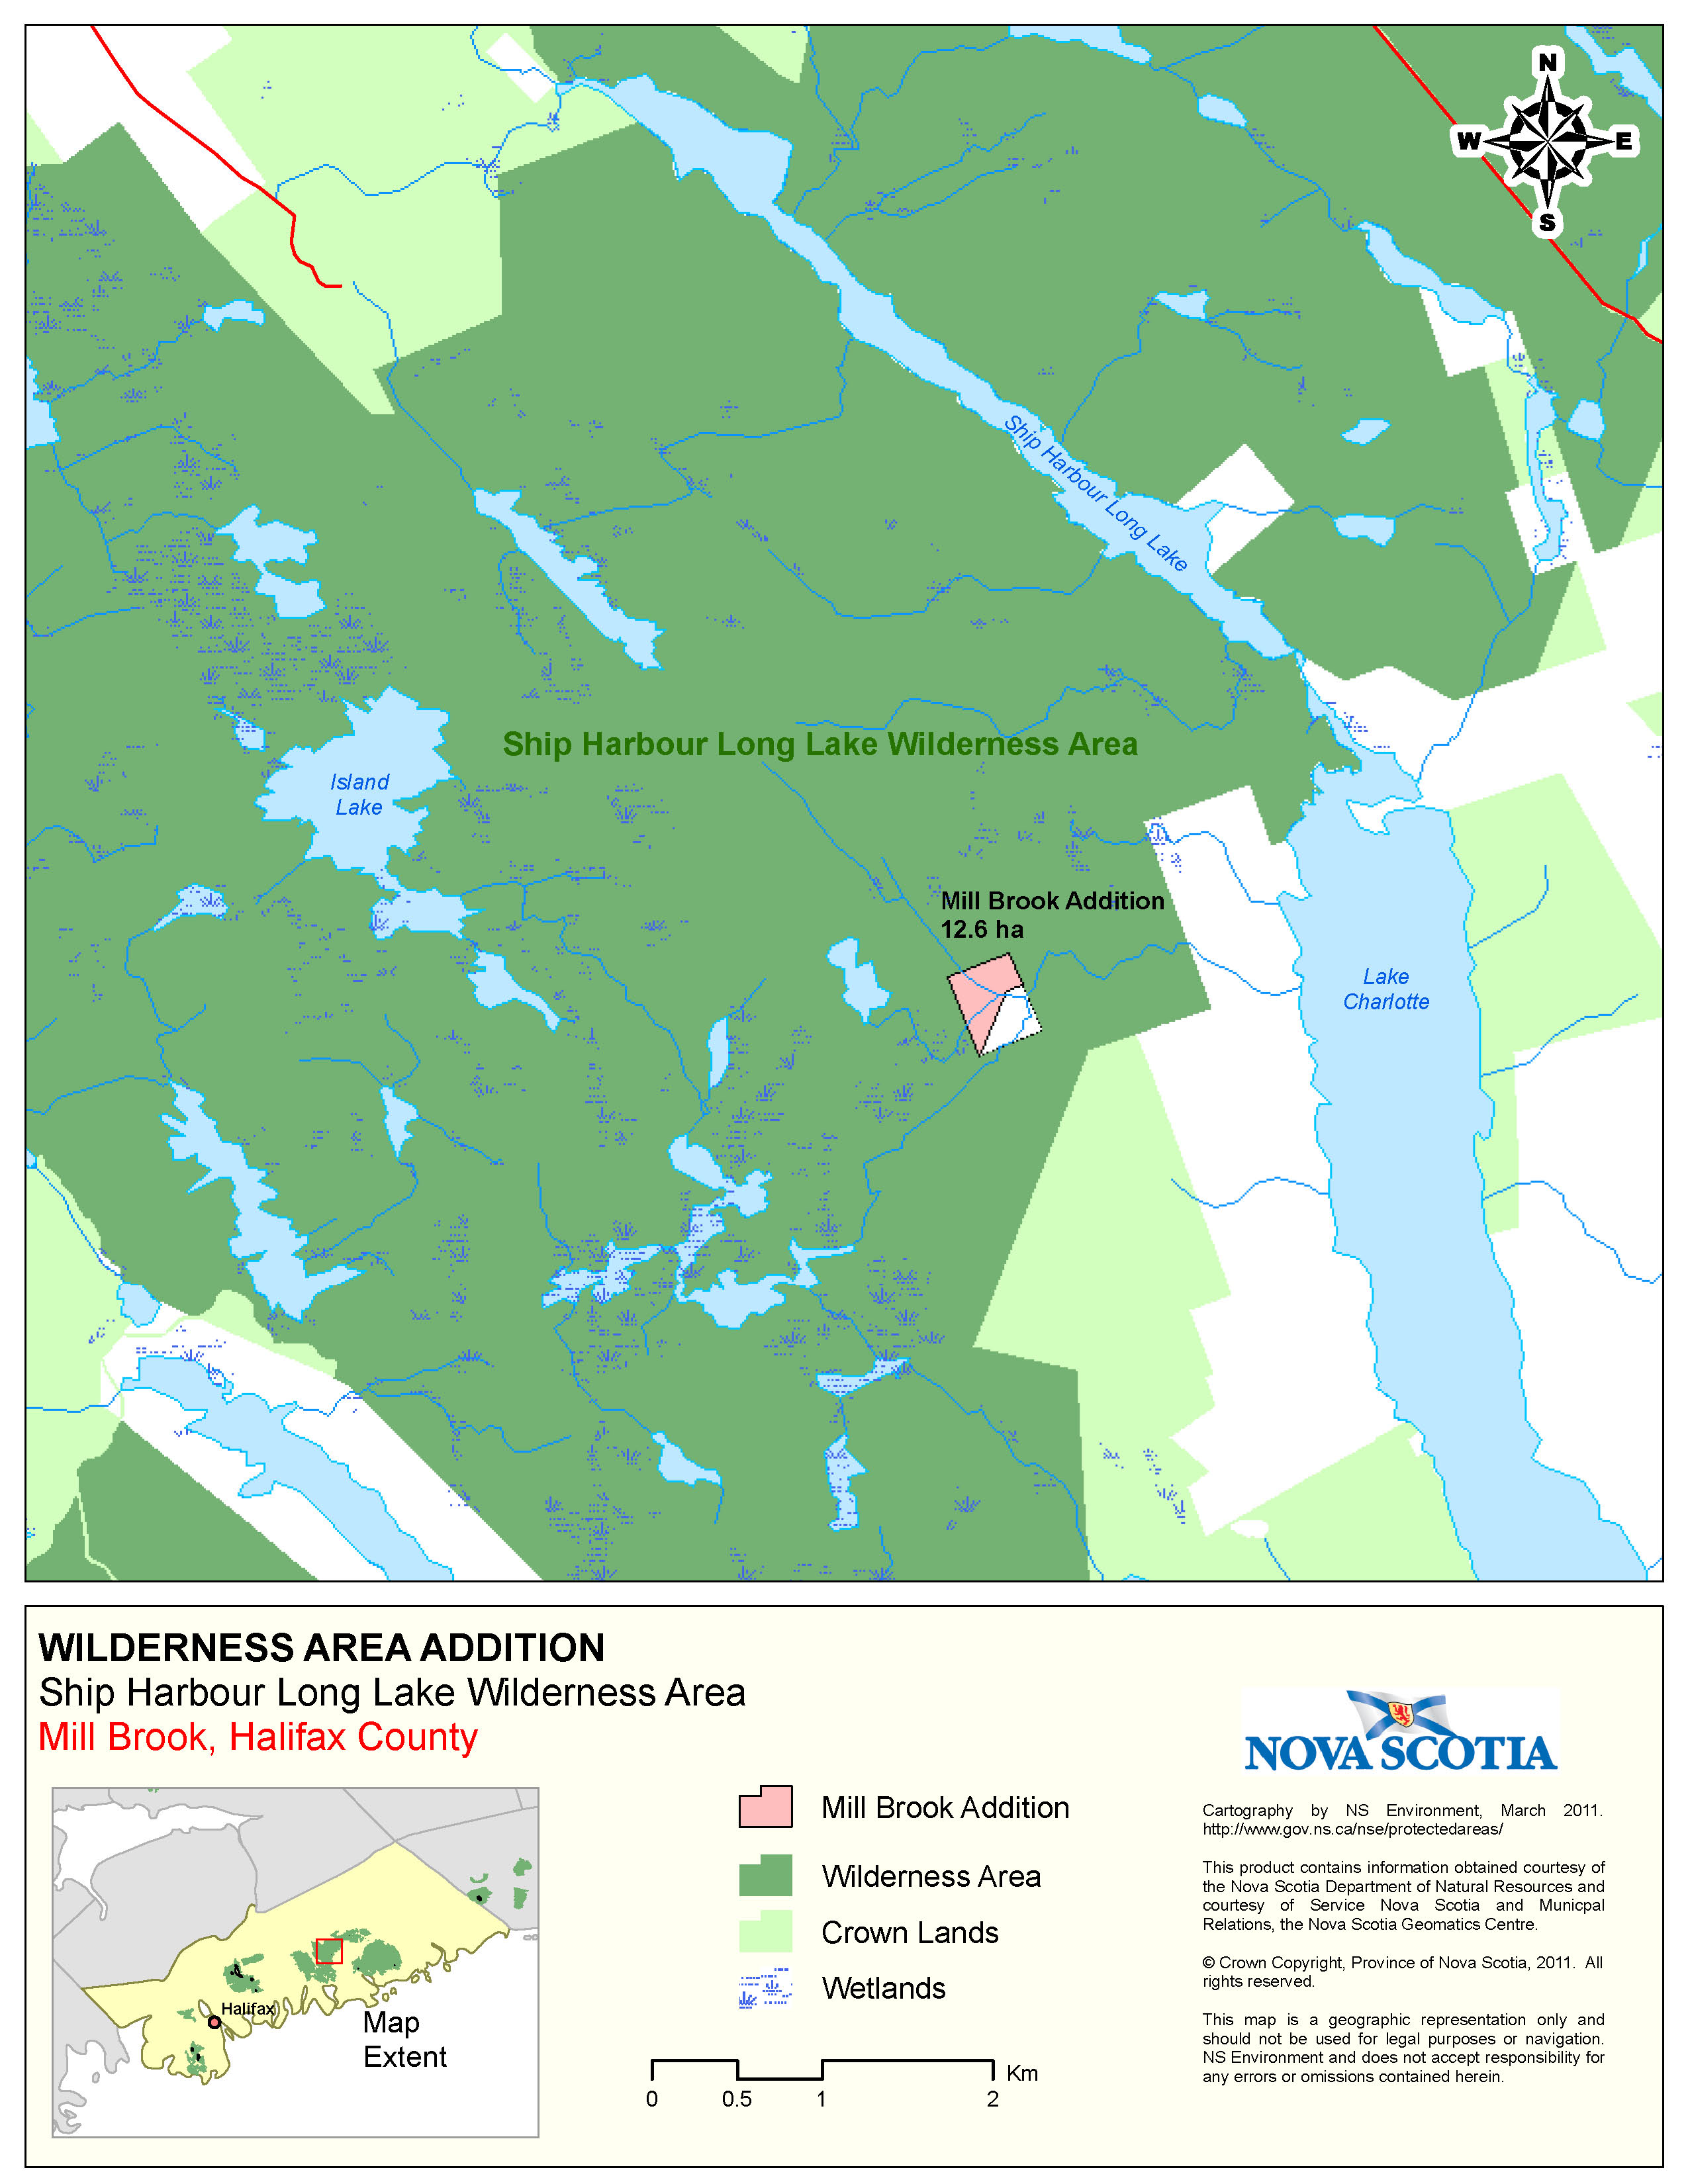 Graphic showing map of Boundaries of Crown Land at  Mill Brook, Halifax County Addition to Ship Harbour Long Lake Wilderness Area